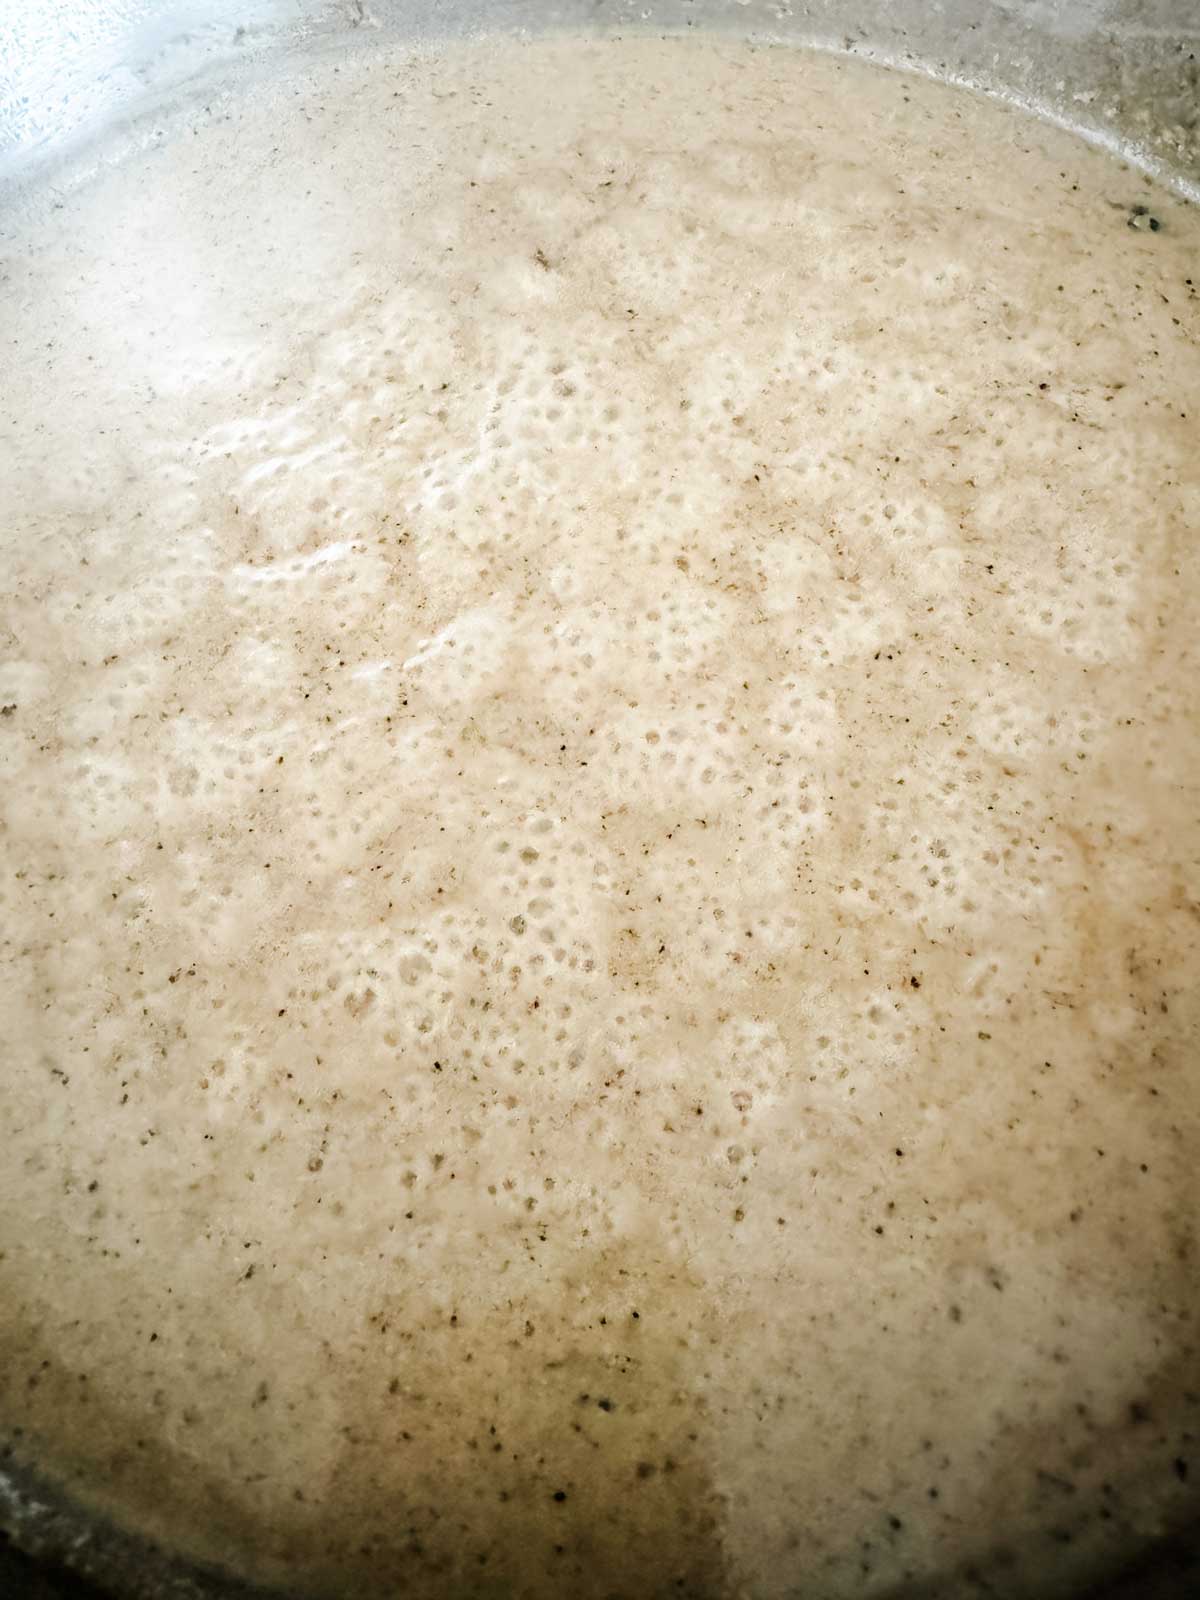 A peppery cream sauce being made in a large skillet.